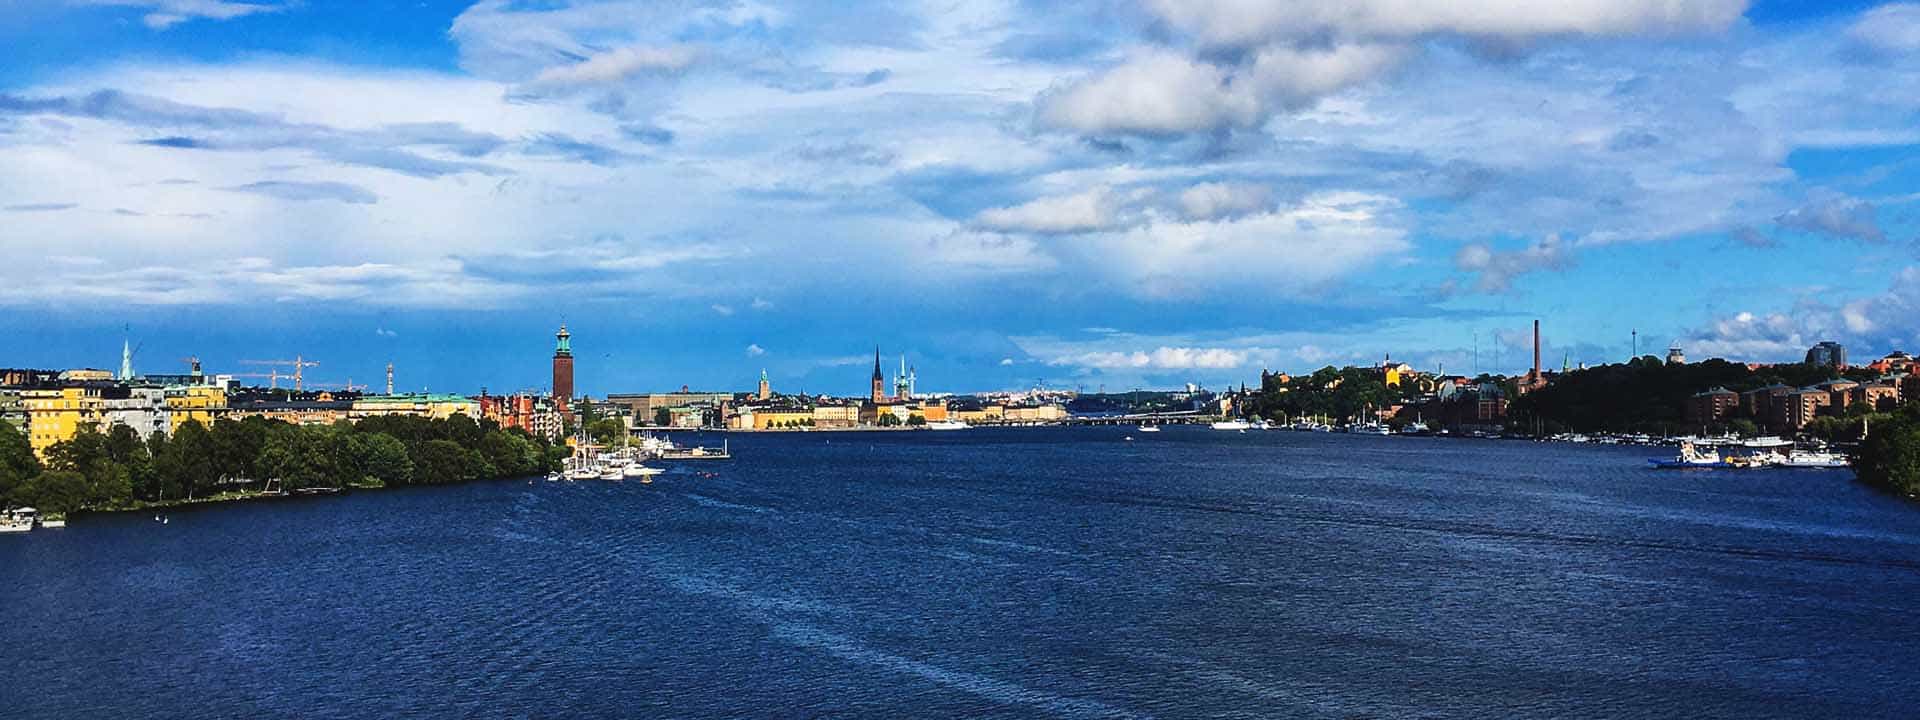 Run of the month Stockholm